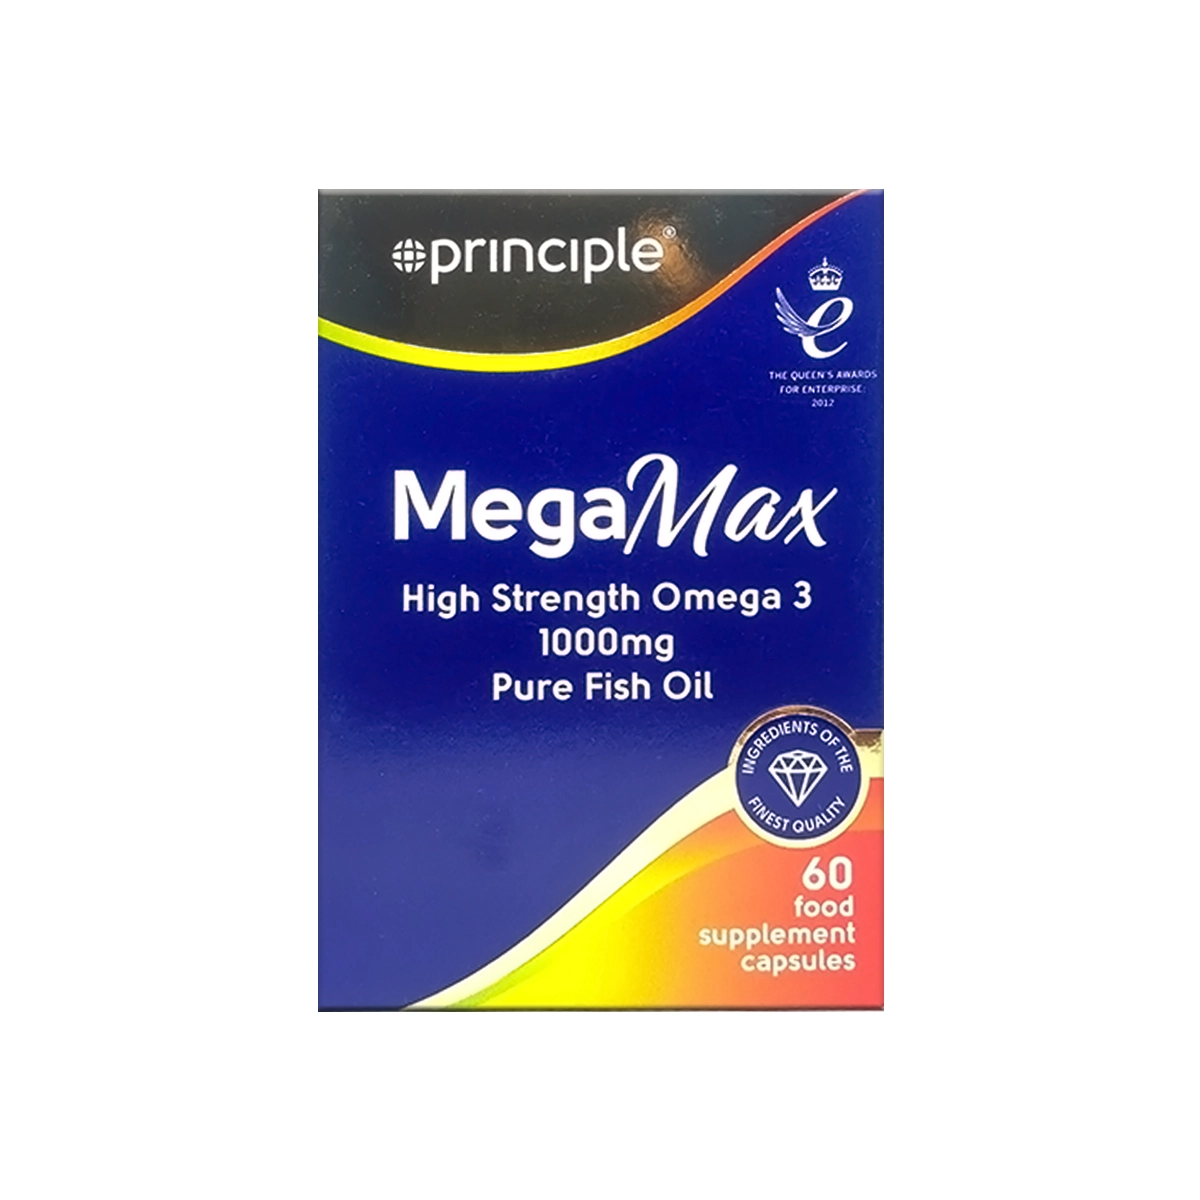 First product image of Principle MegaMax Omega-3 1000mg Capsule 60s